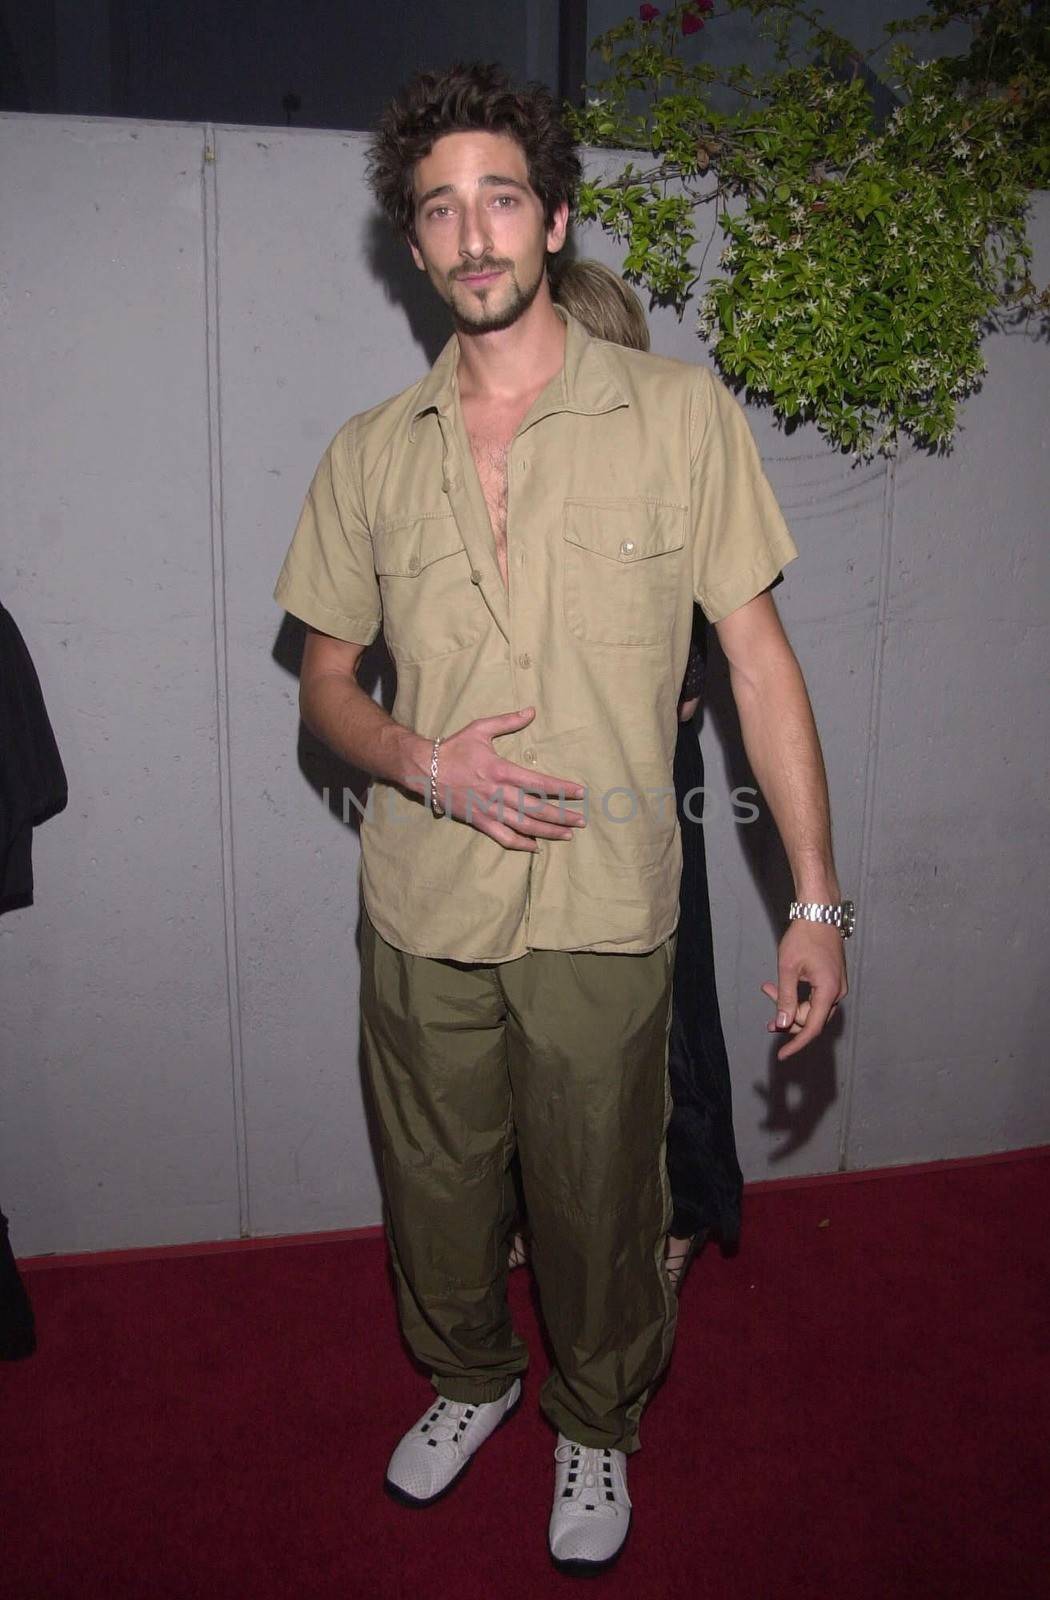 Adrien Brody at the premiere of Lions Gate Film's "THE BIG KAHUNA" in Hollywood, 04-26-00